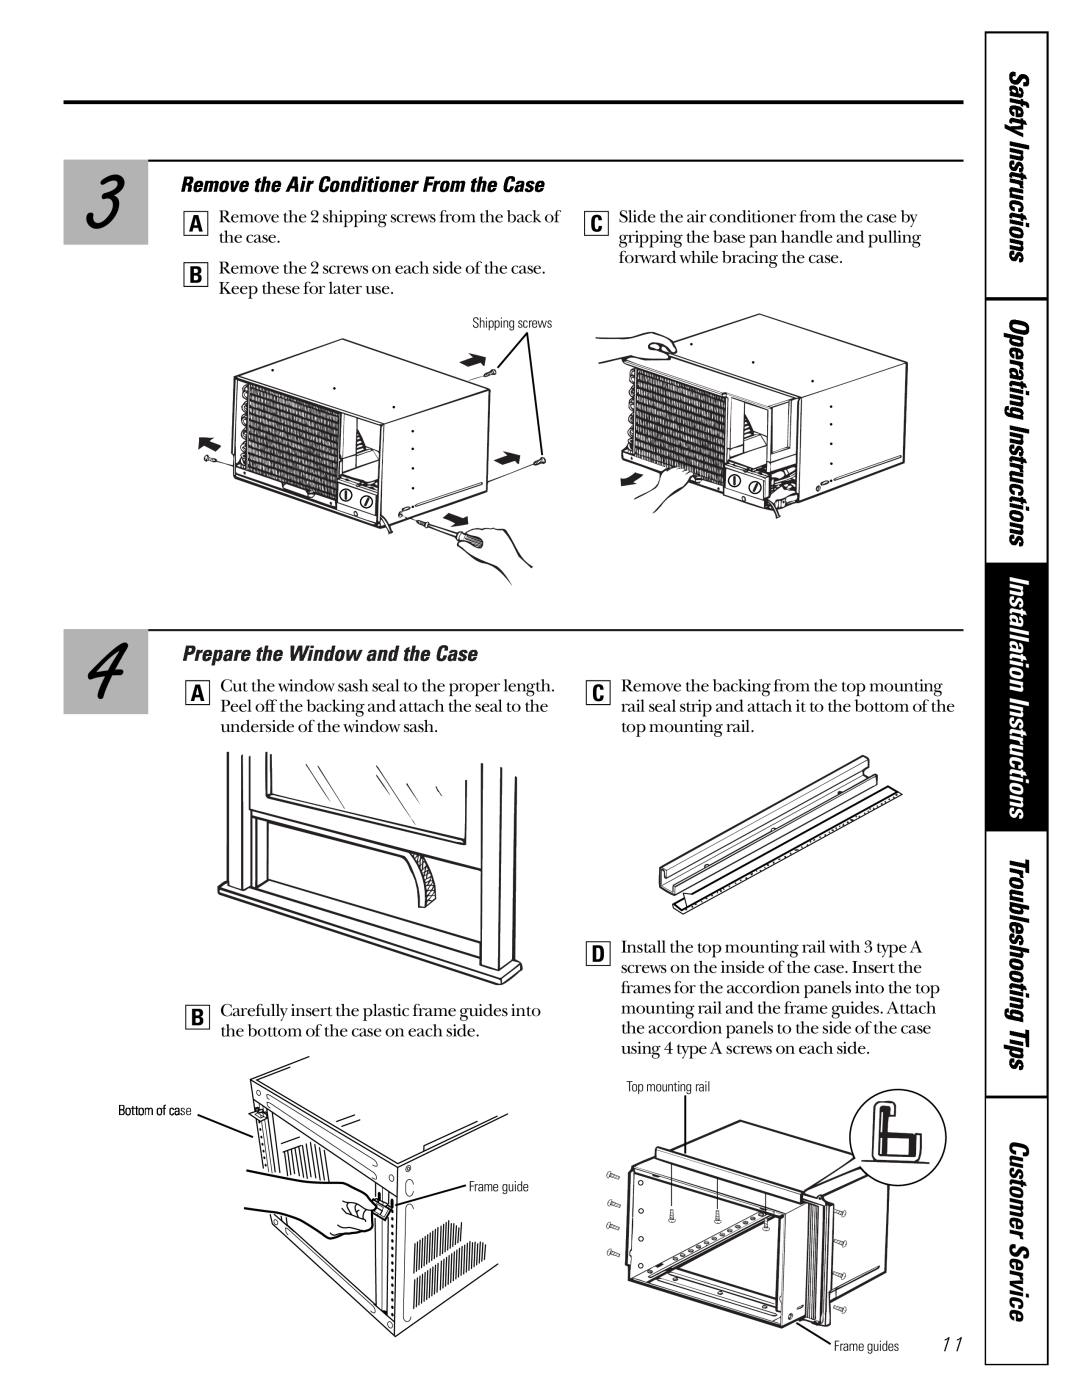 GE AG_08  8 Safety Instructions Operating Instructions, Installation Instructions, Prepare the Window and the Case 